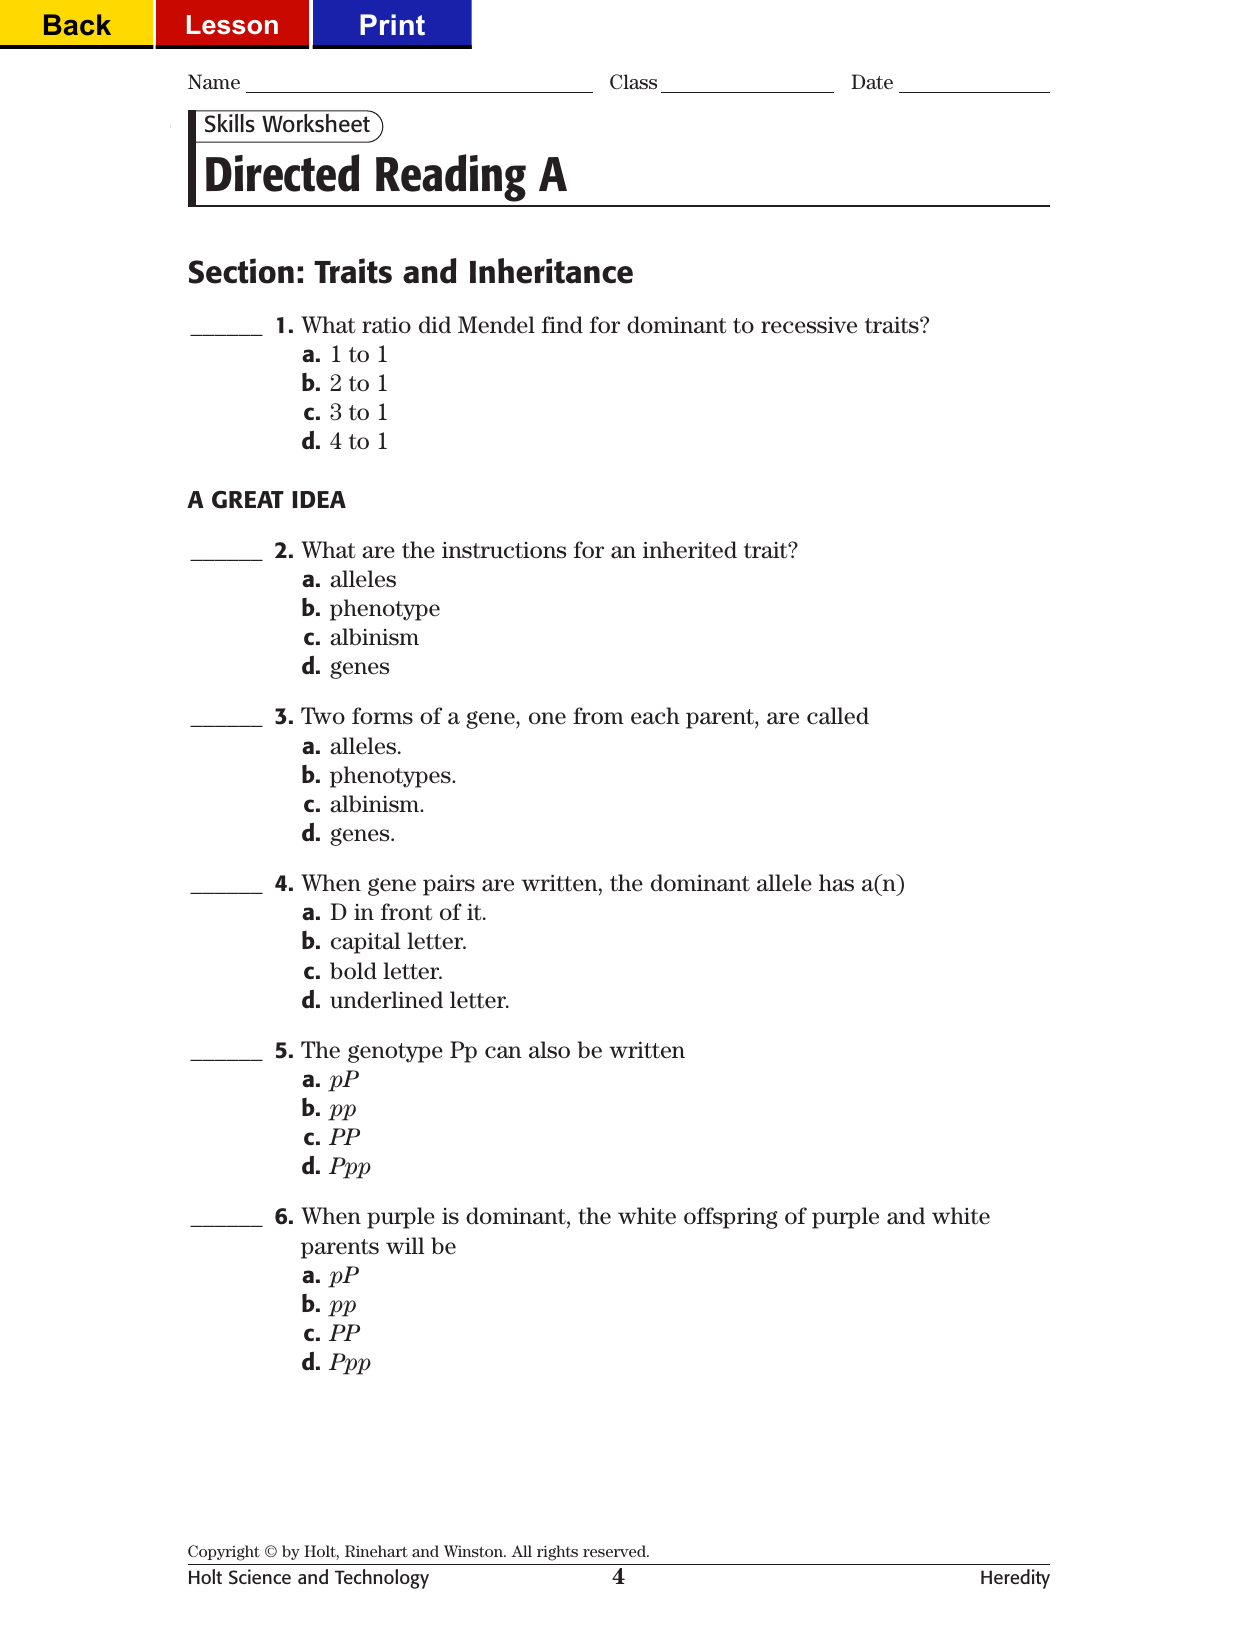 Directed Reading A For Skills Worksheet Directed Reading A Answer Key